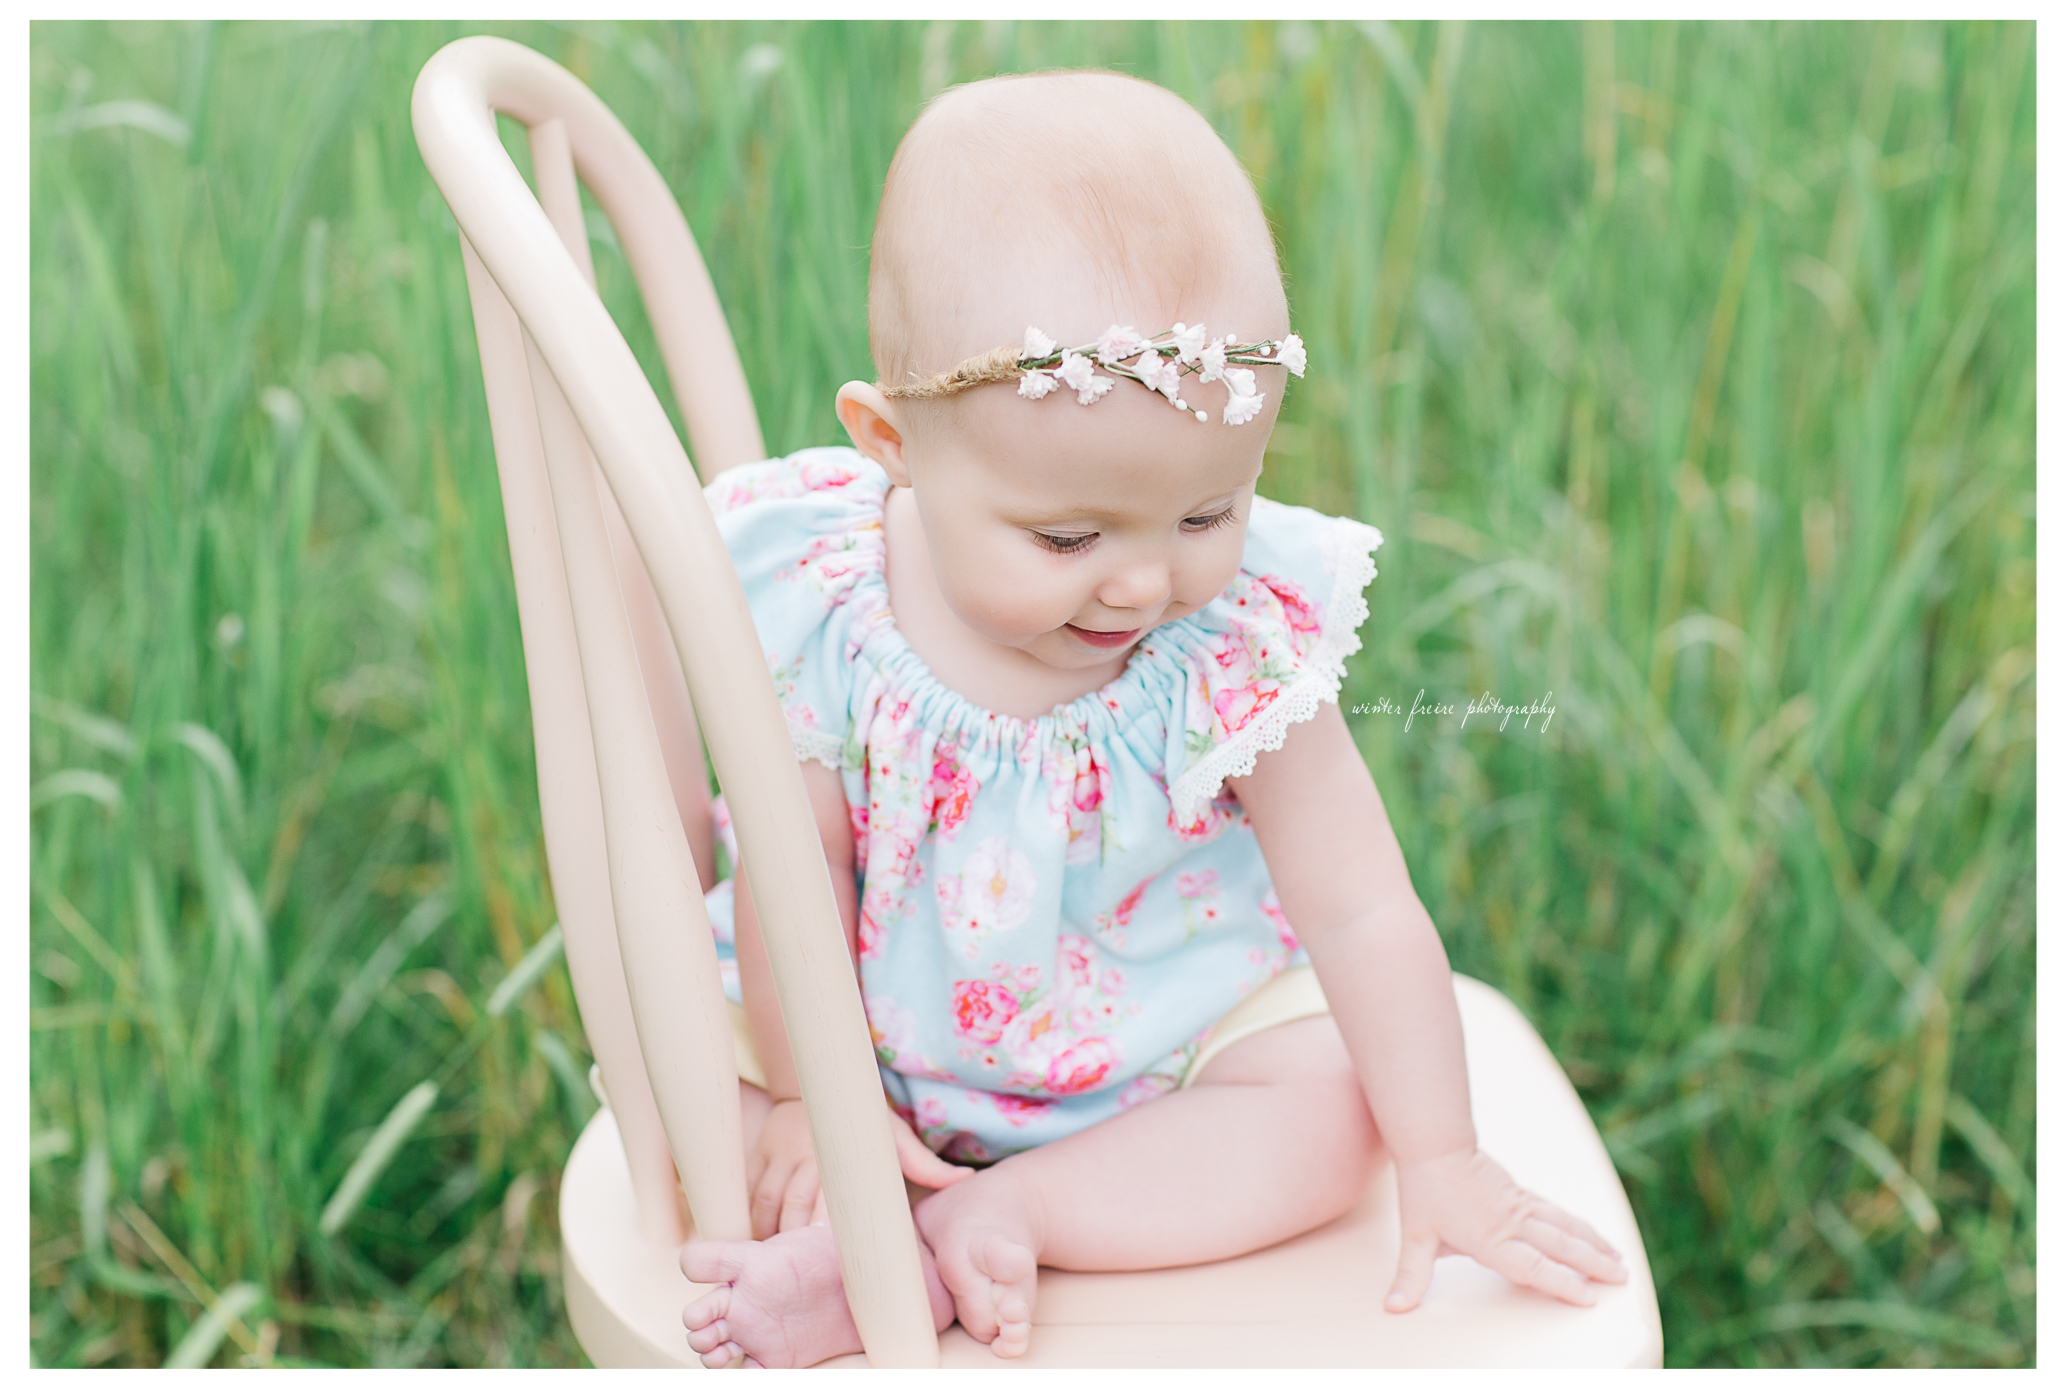 Winter Freire Photography | Sweet Pure Organic | Dayton, Ohio Fine Art Baby and Child Photography | Darling Baby Shop Commercial Shoot | Darling Baby Shop Mint + Yellow Collection 2017